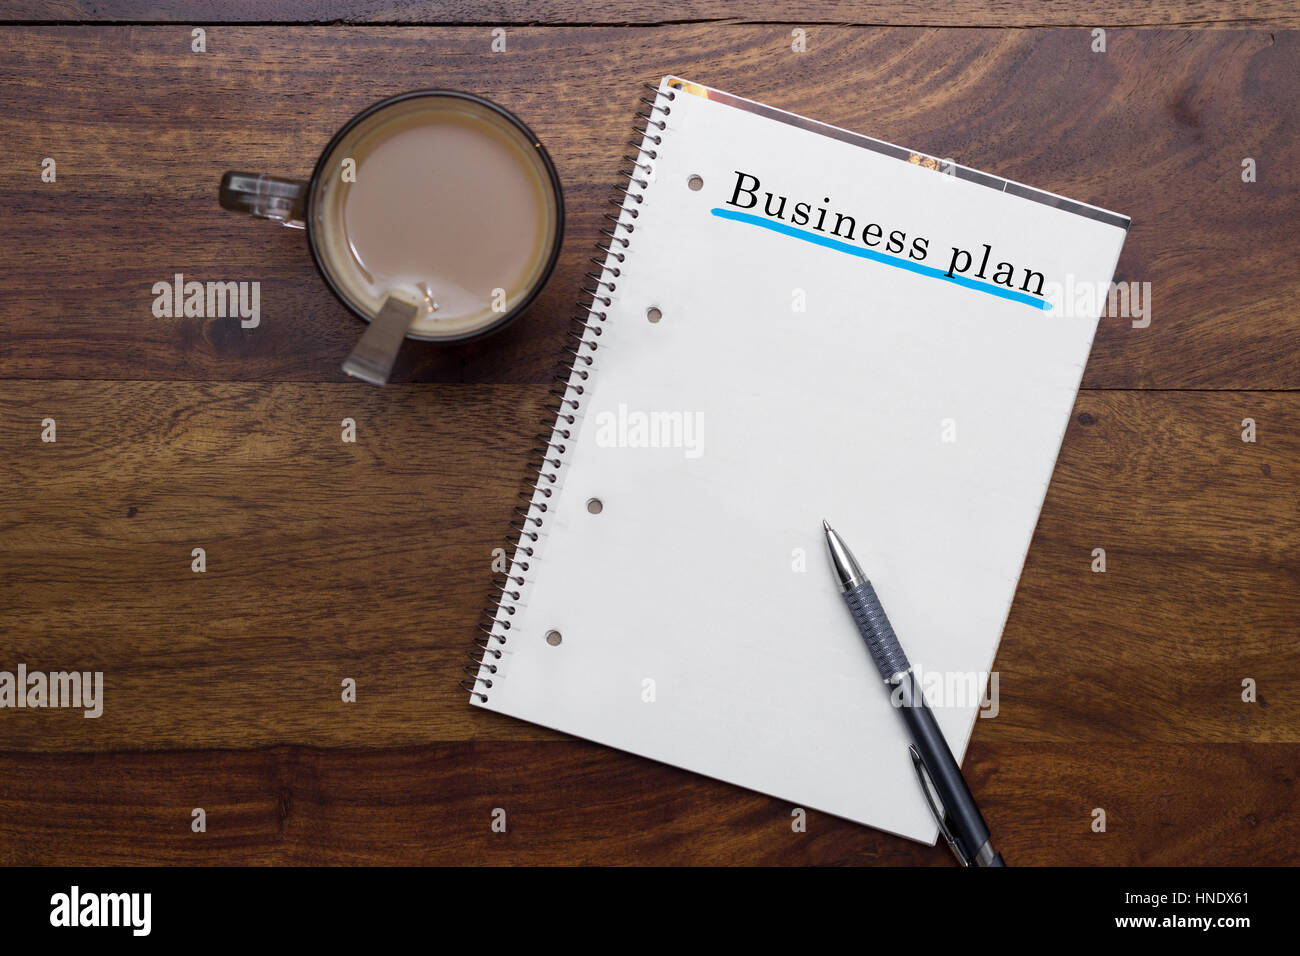 business plan blank paper Stock Photo